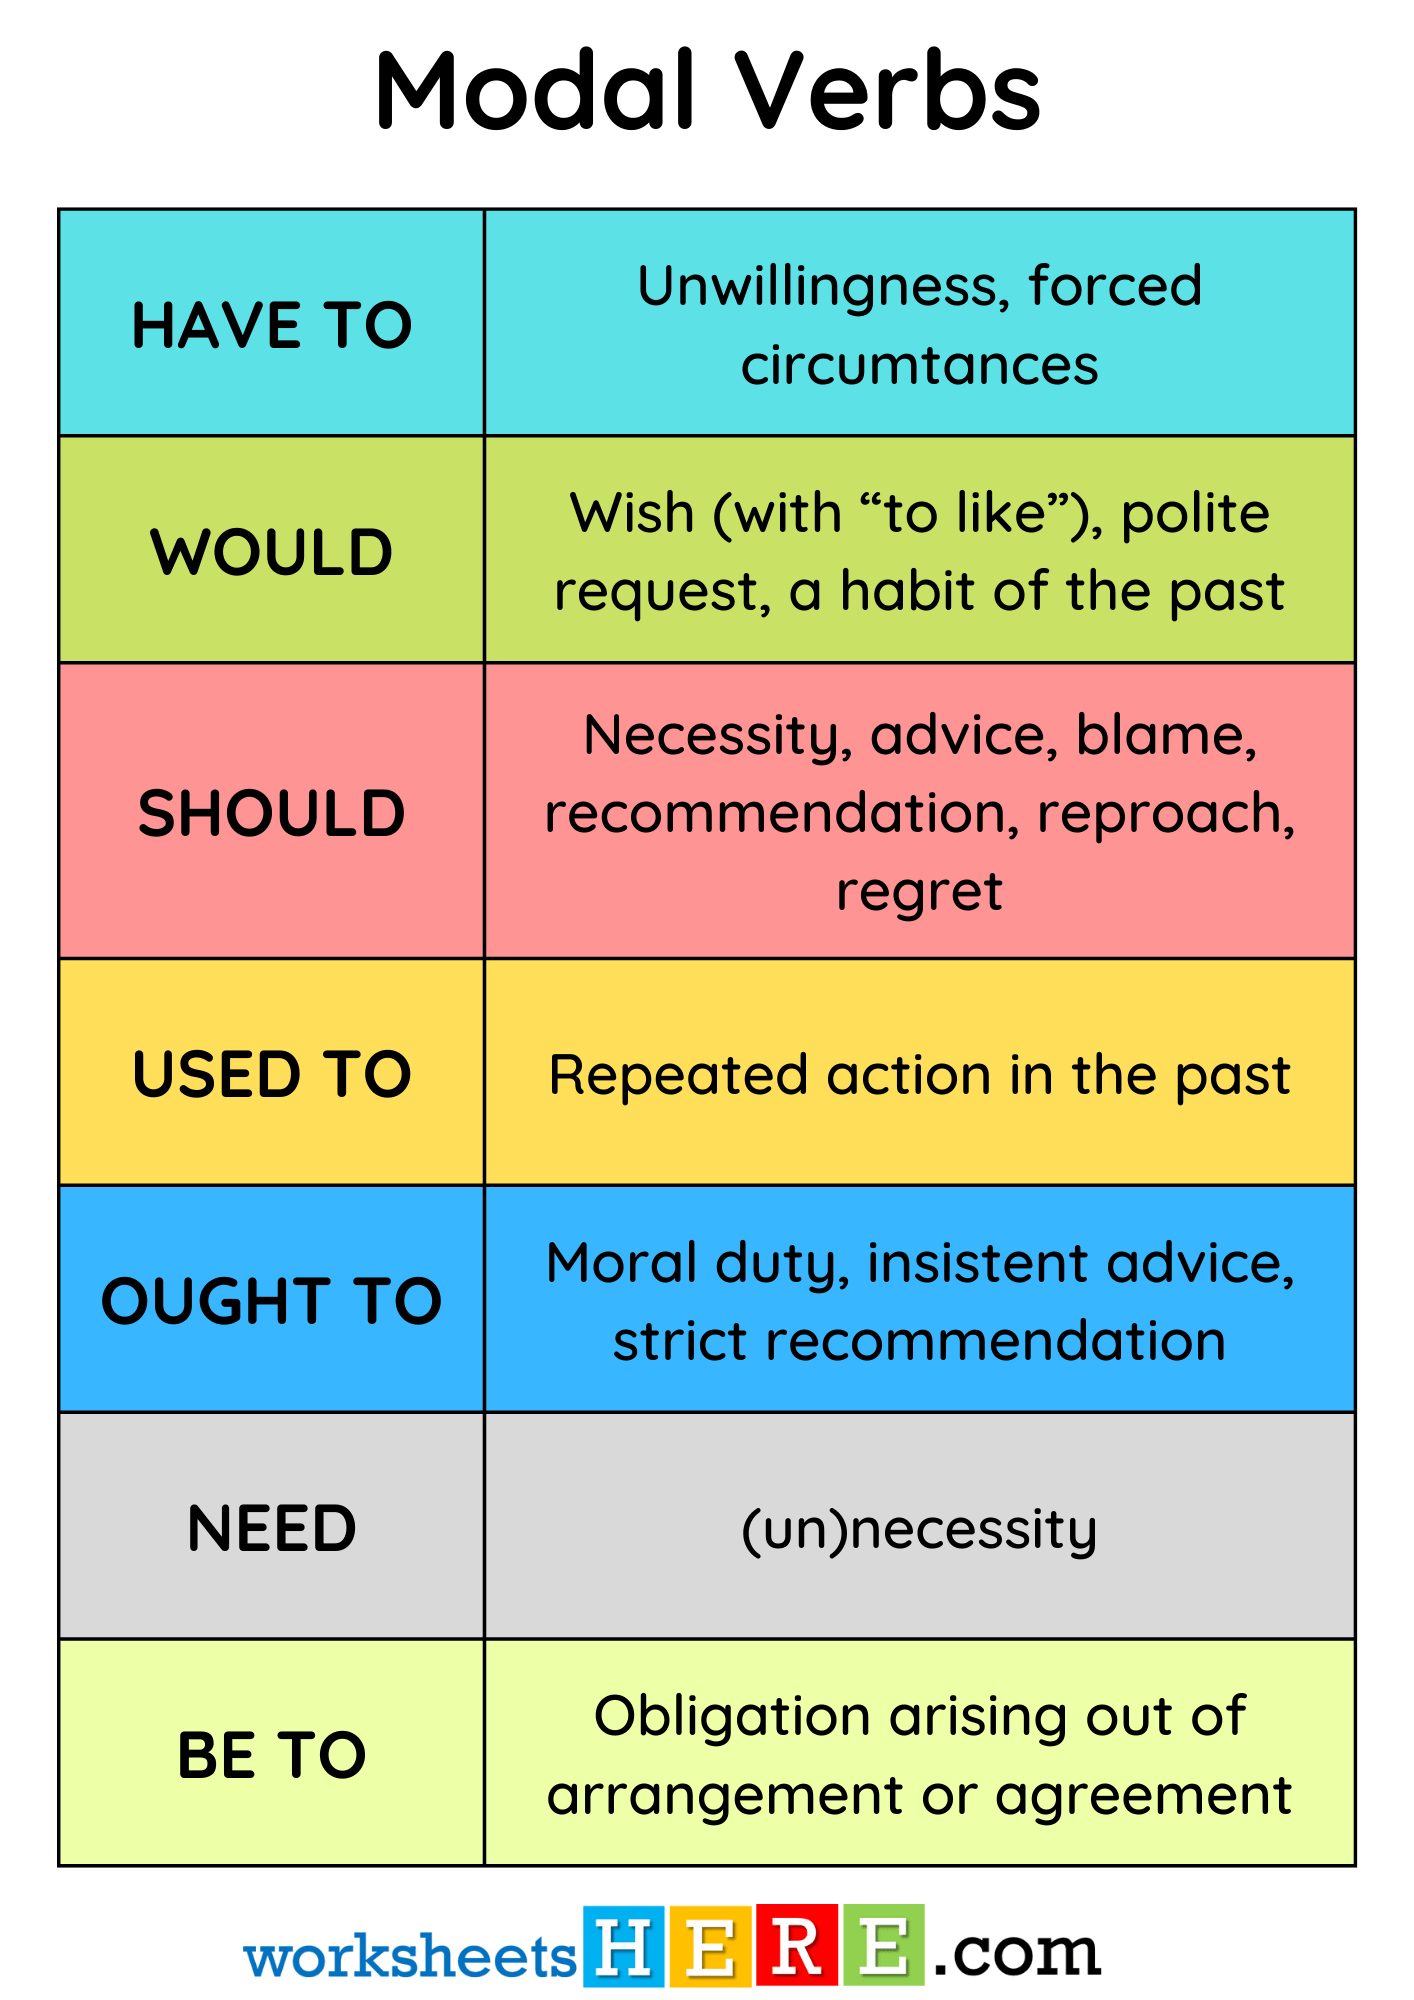 Modal Verbs List and Uses PDF Worksheet For Students and Kids